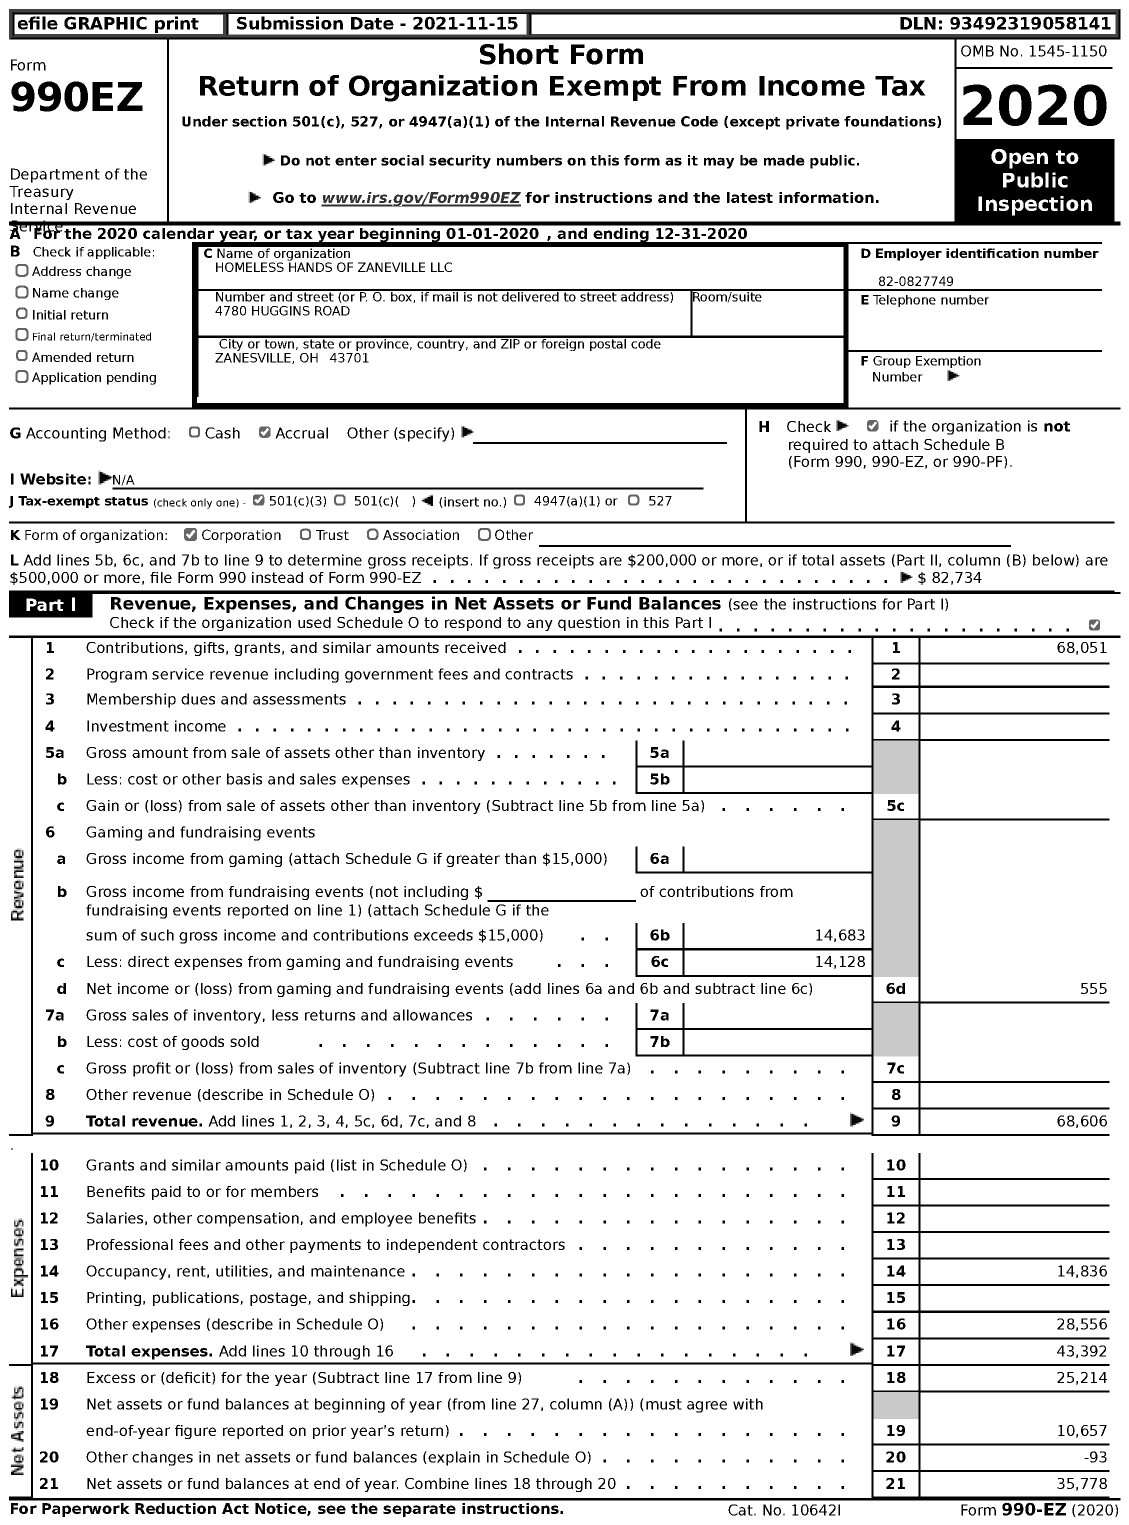 Image of first page of 2020 Form 990EZ for Homeless Hands of Zaneville LLC